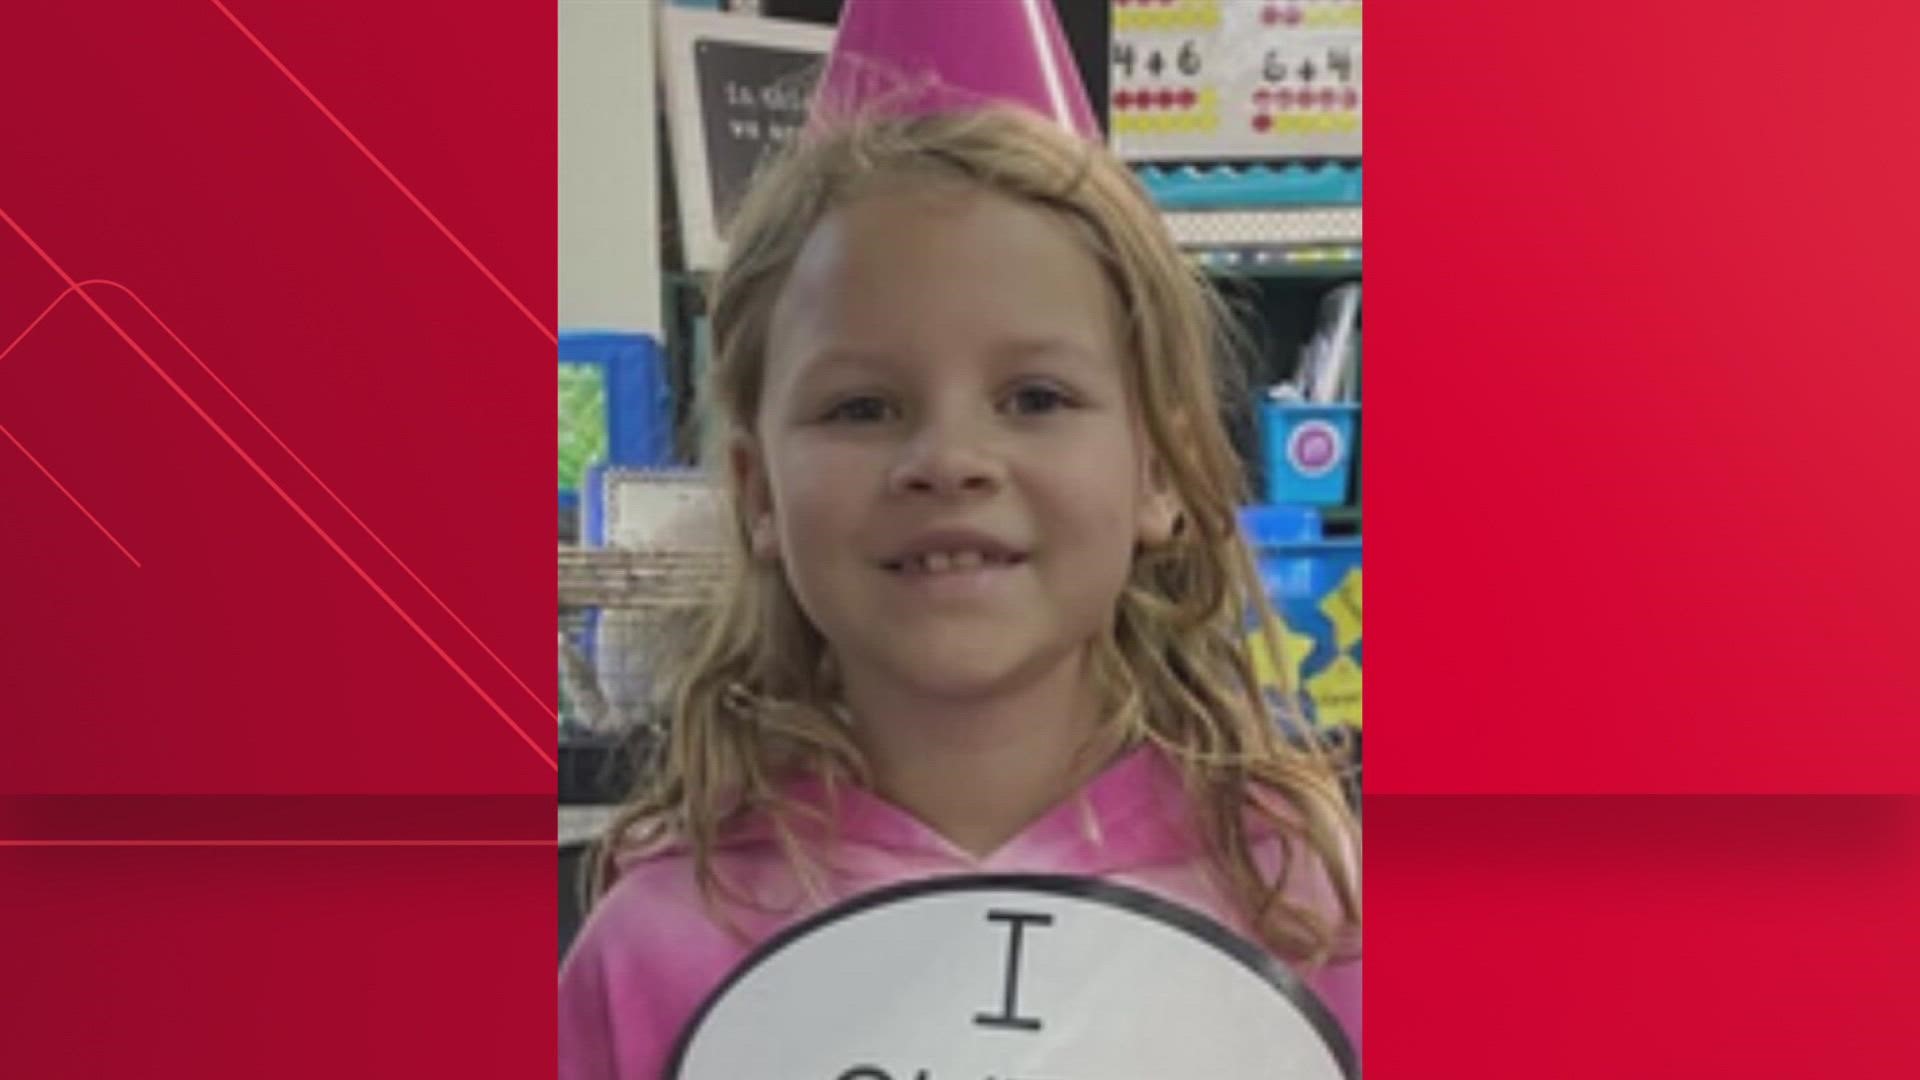 Police said the mother of 7-year-old Athena had been looking for her since before 6 p.m. She was last seen around County Road 3573 in Paradise.